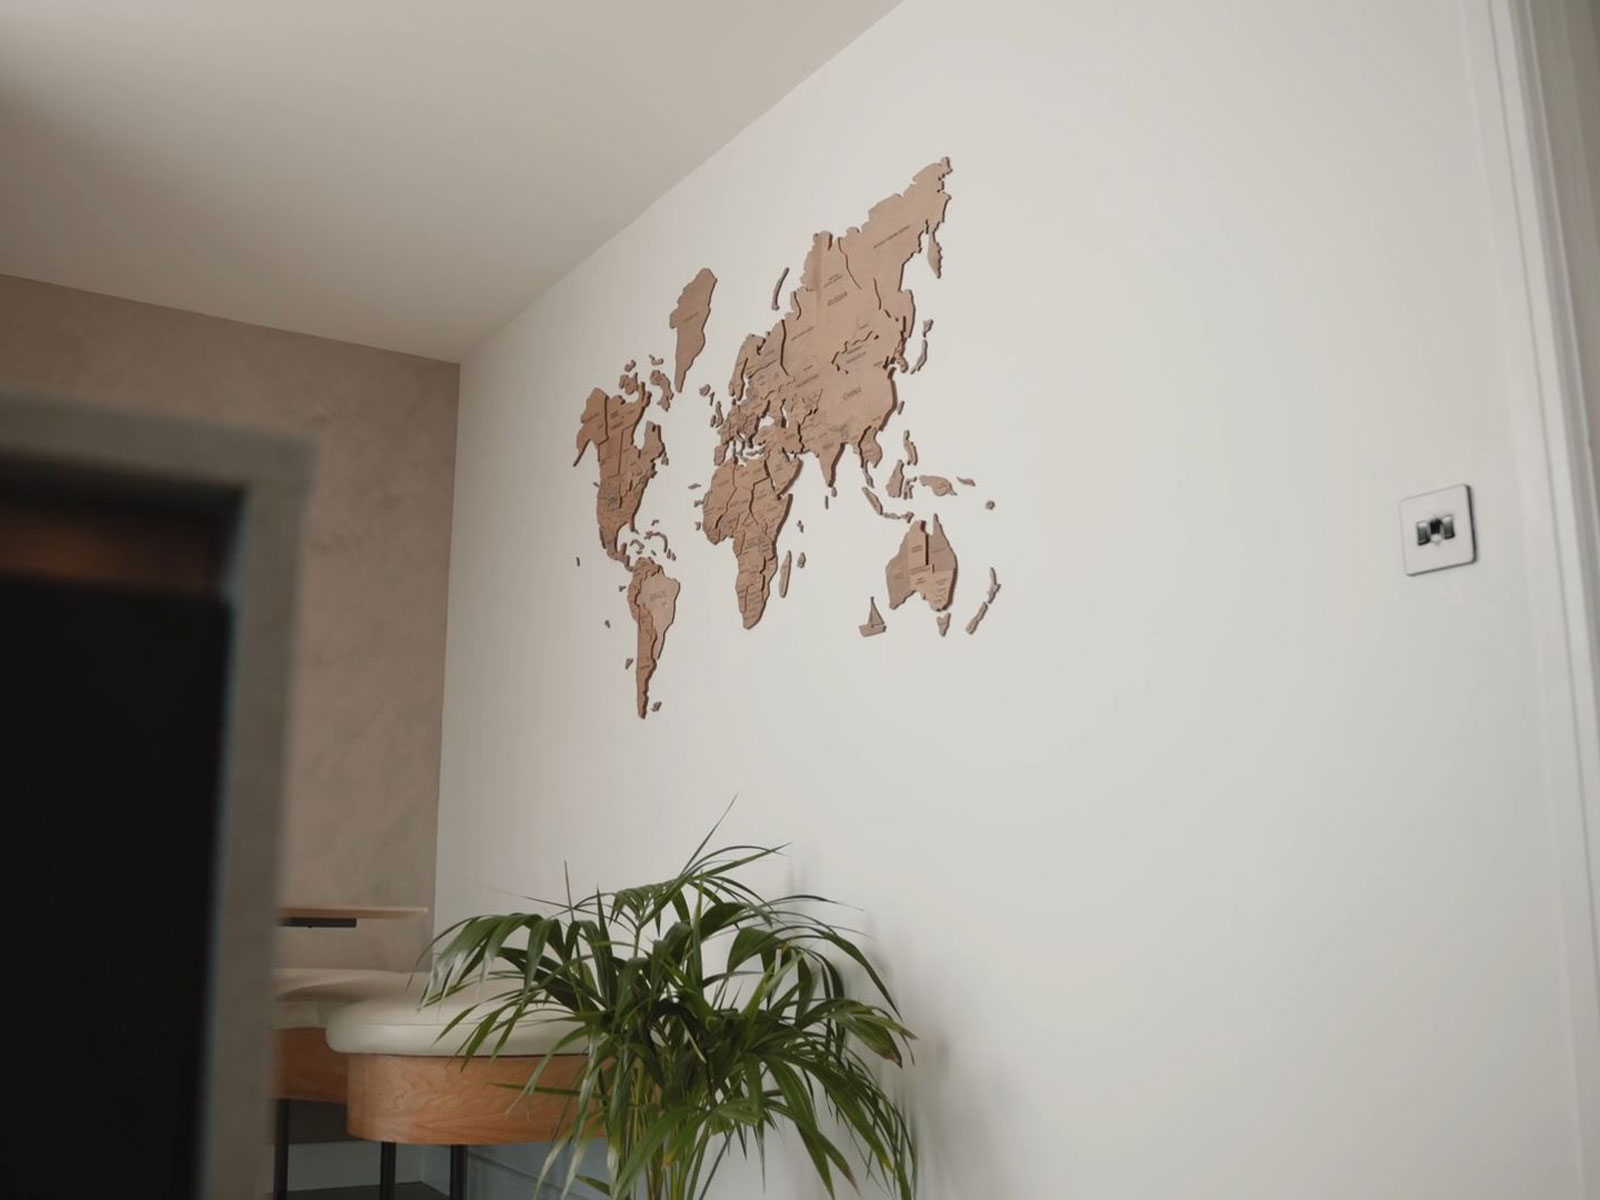 Modern kitchen design decorations, including a wall map and a kitchen plant